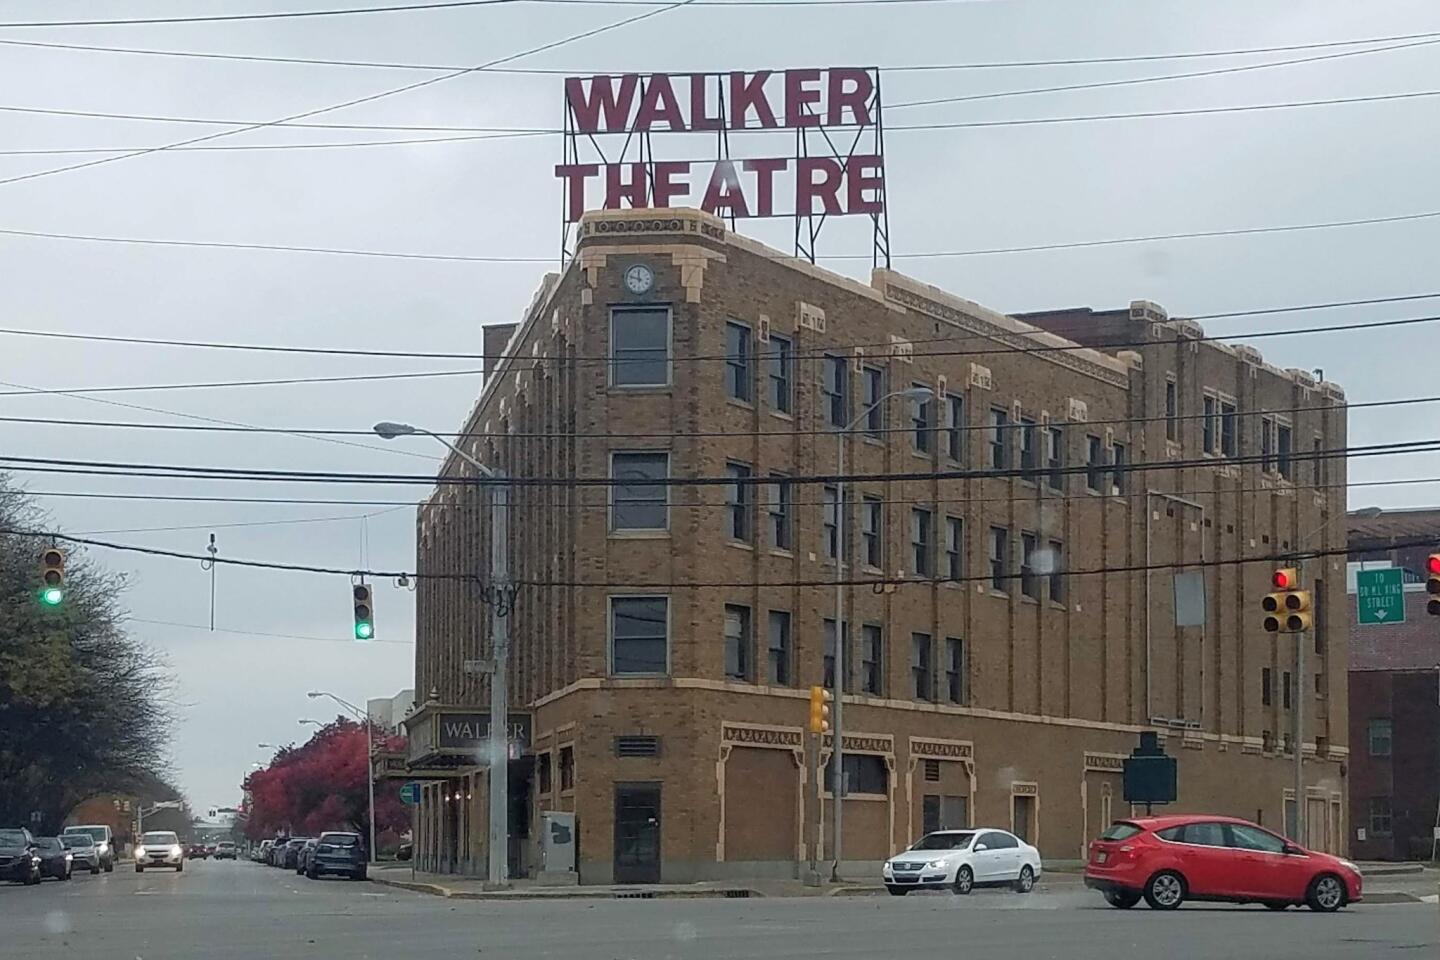 The Walker Theatre, located less than a mile north of downtown Indianapolis, has been a community center for the city’s African-American community since being built about a century ago. It's scheduled to reopen by earlynext year following a multi-million dollar renovation.